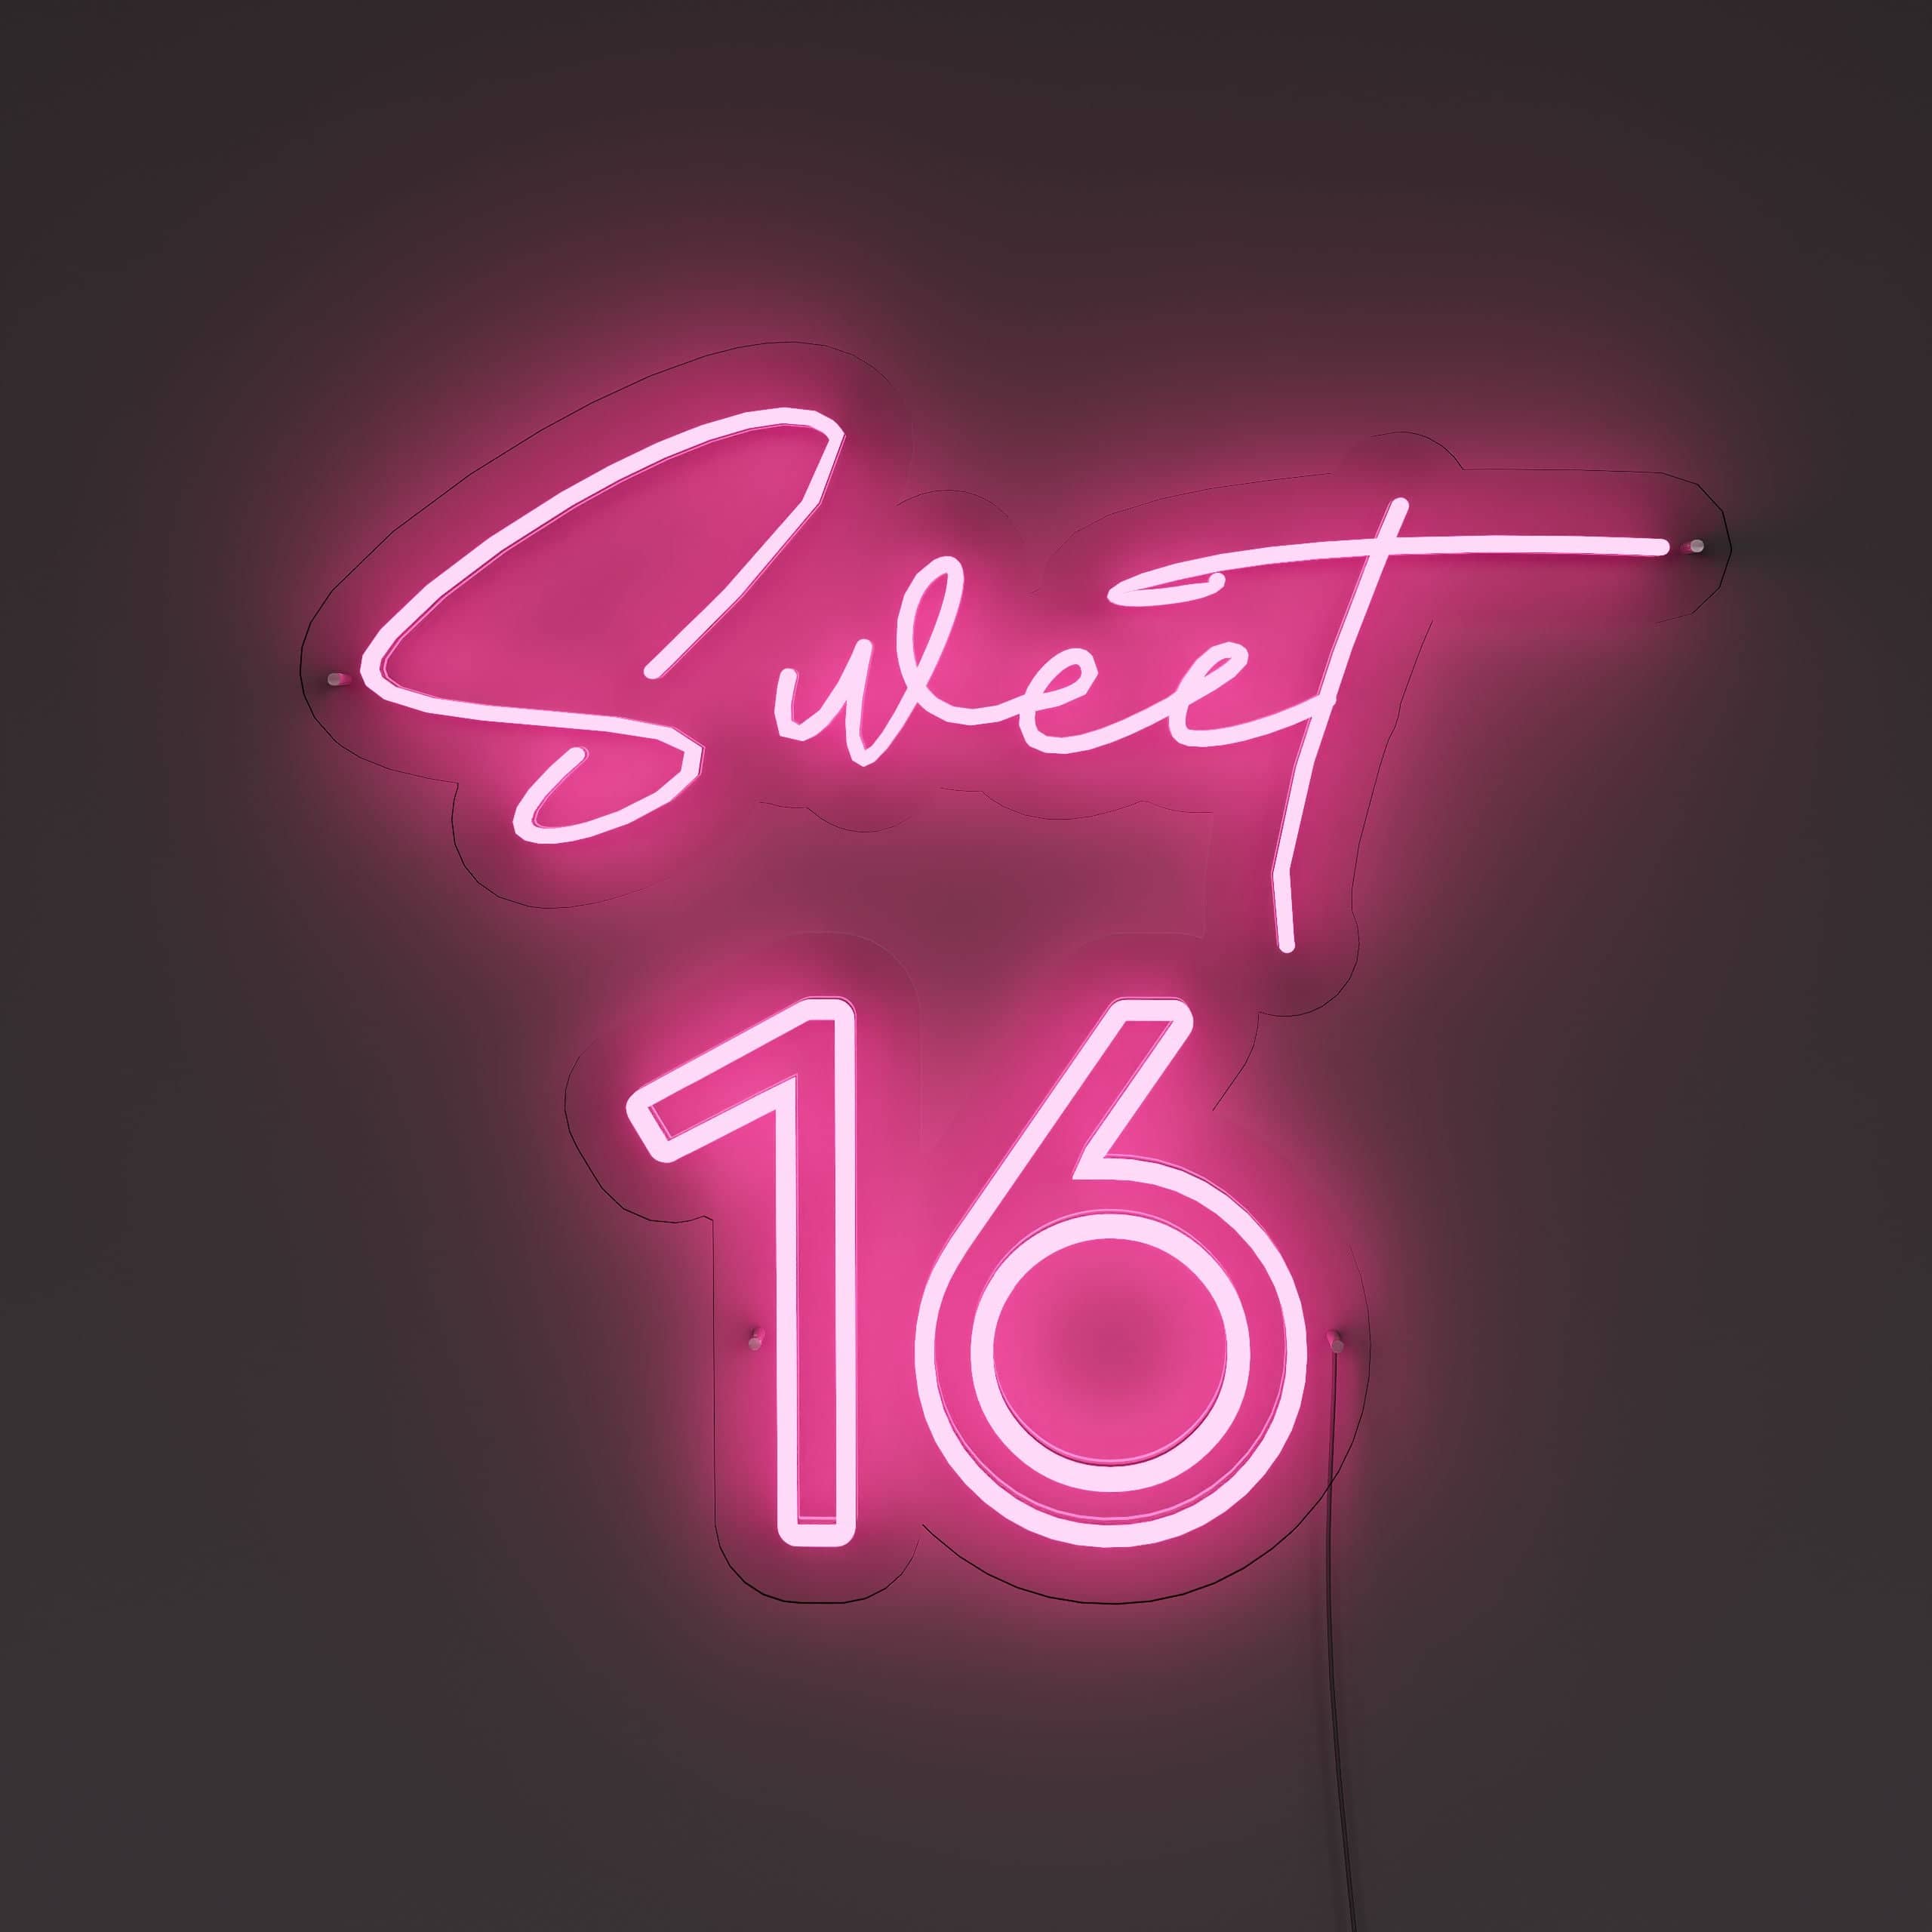 enjoy-every-moment-of-your-special-16th!-neon-sign-lite